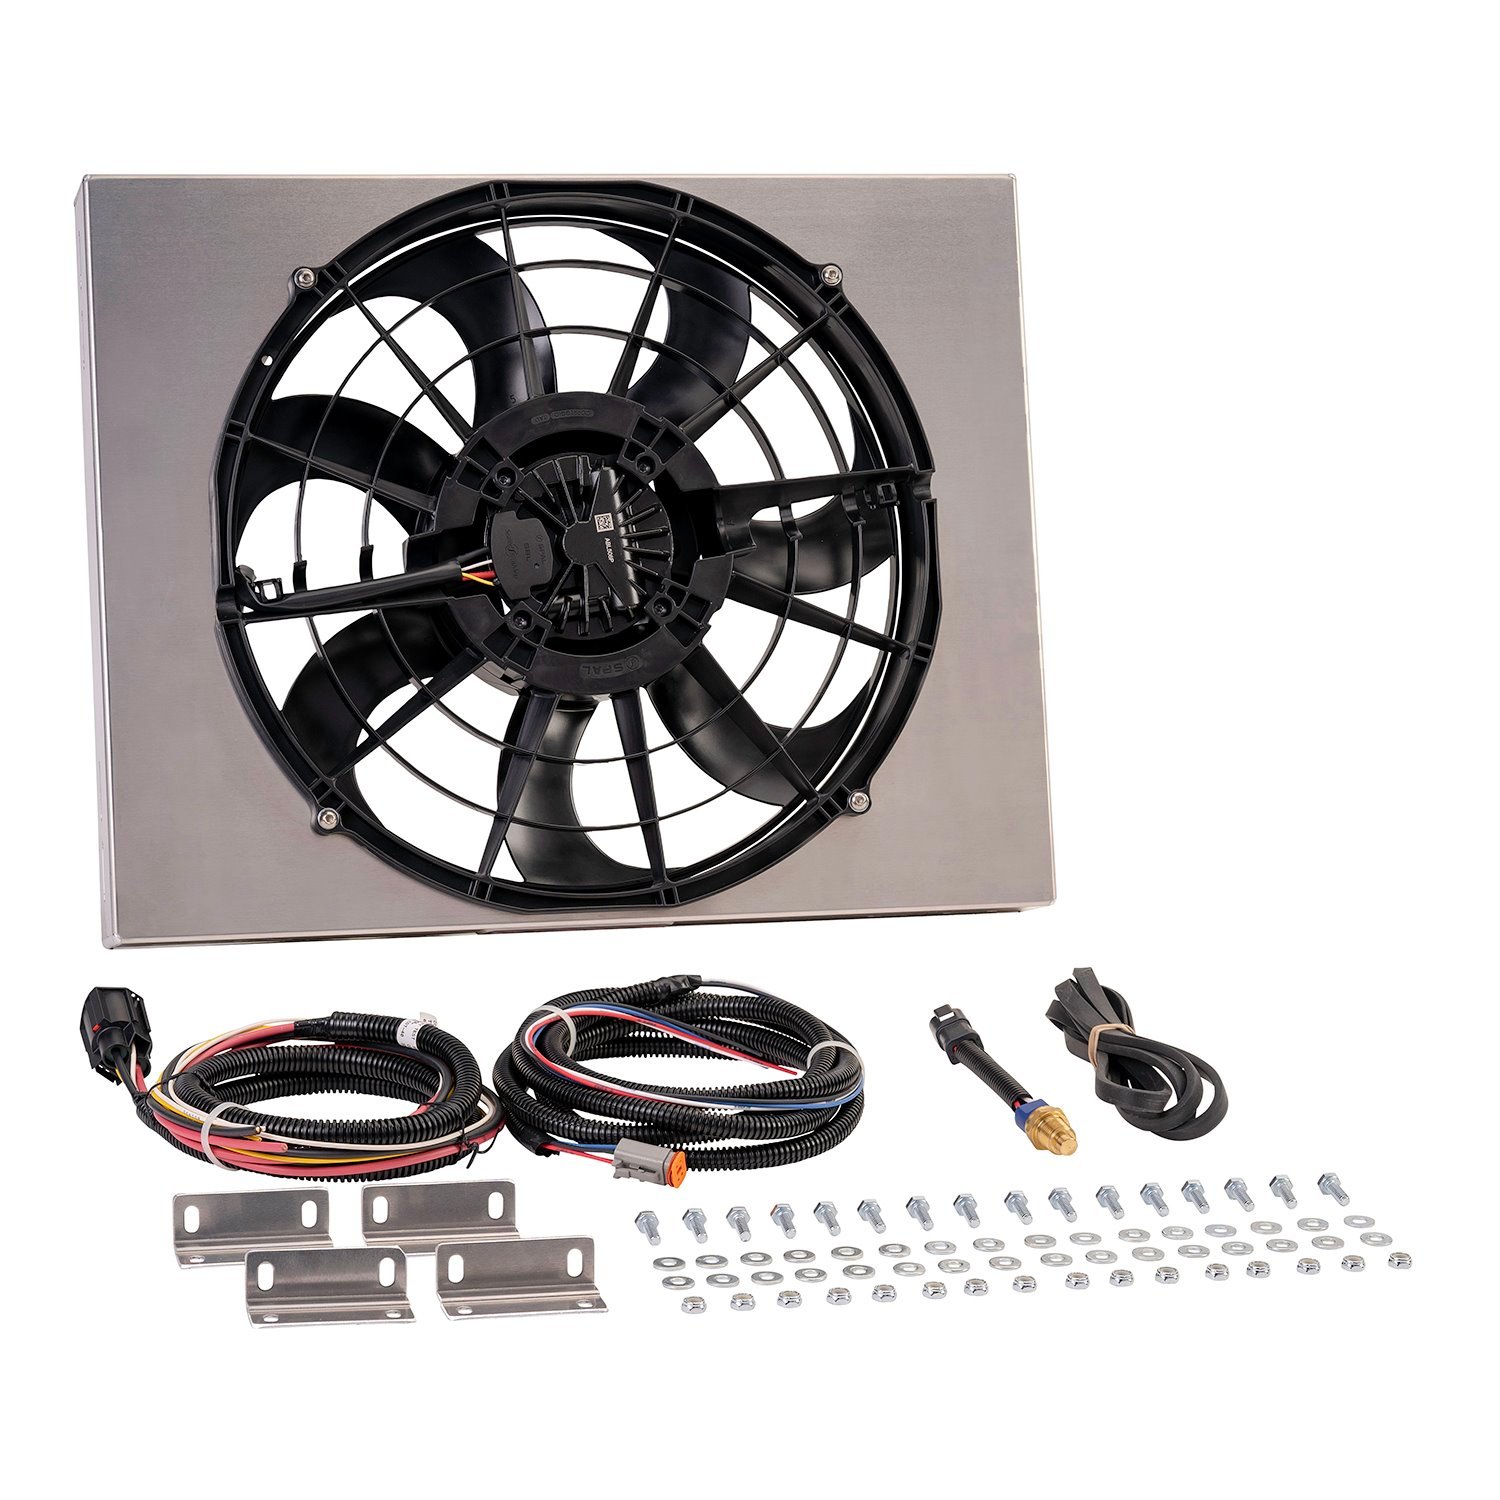 67922-195 Brushless Single Powerpack 17 in. Radiator Fan Assembly with Integrated 195 Degree PWM Controller